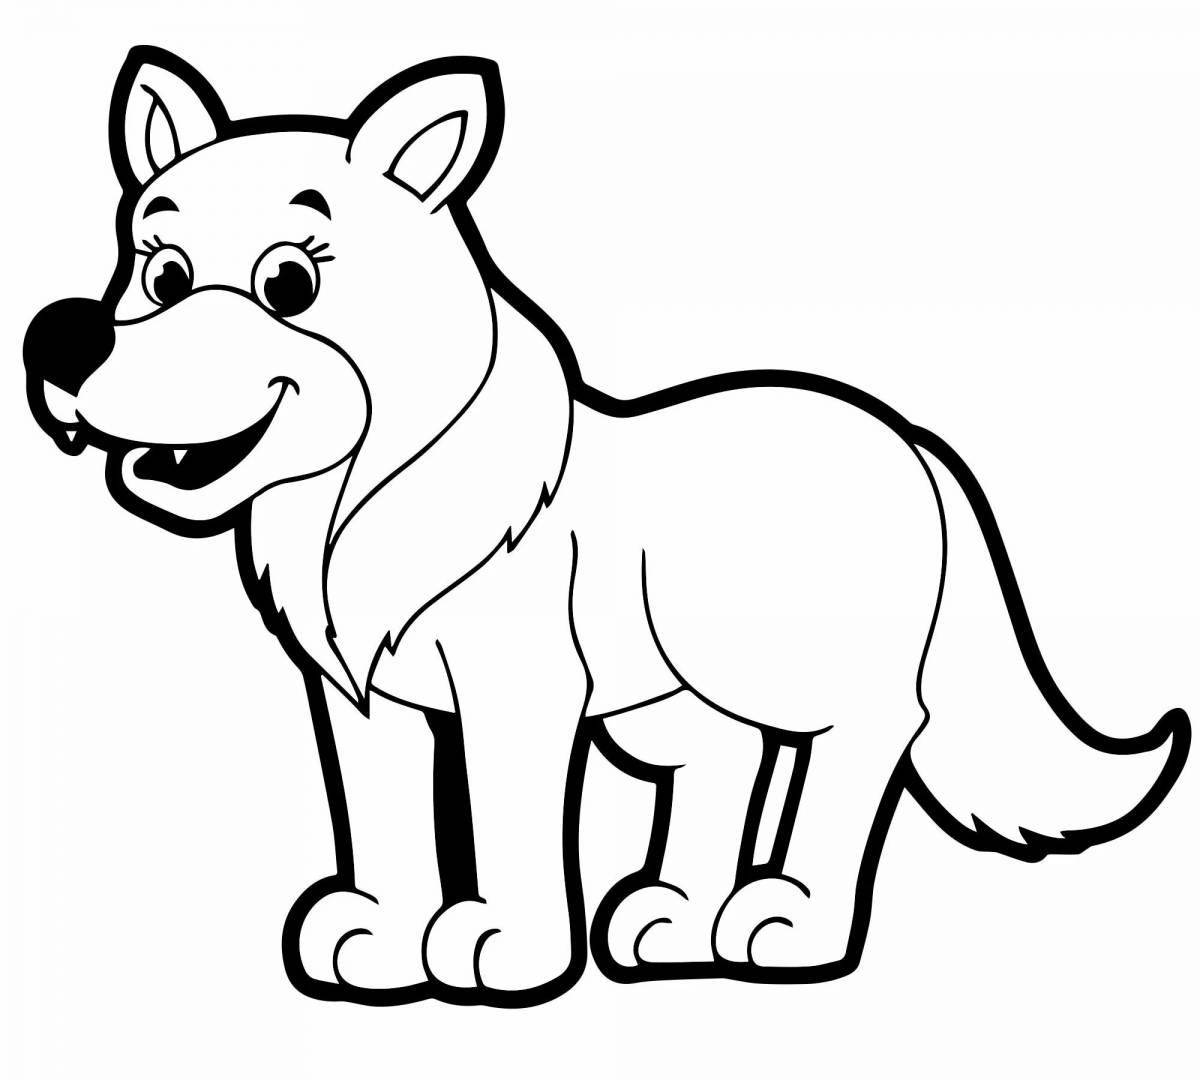 Fun coloring wolf for children 6-7 years old